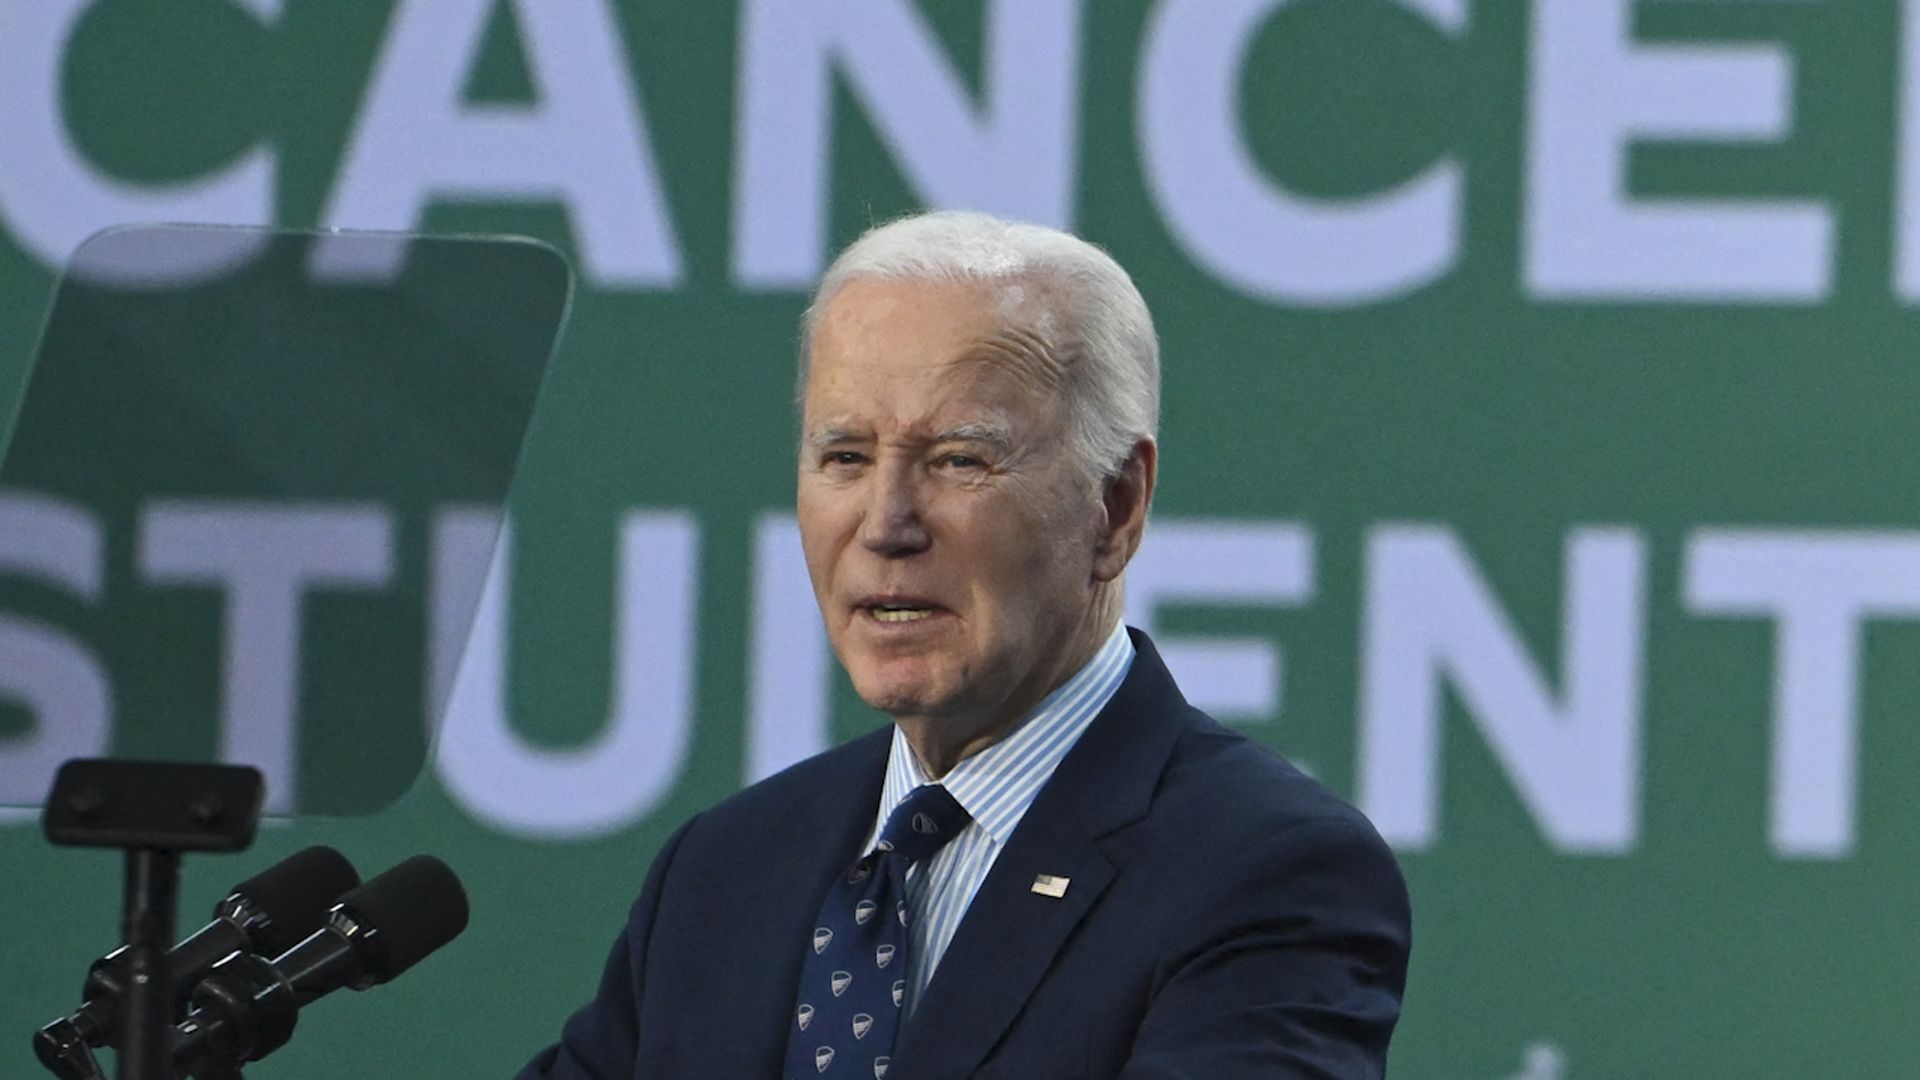 Biden's student loan forgiveness plan is politically divisive, with some biased outlets portraying the issue differently in their headlines.